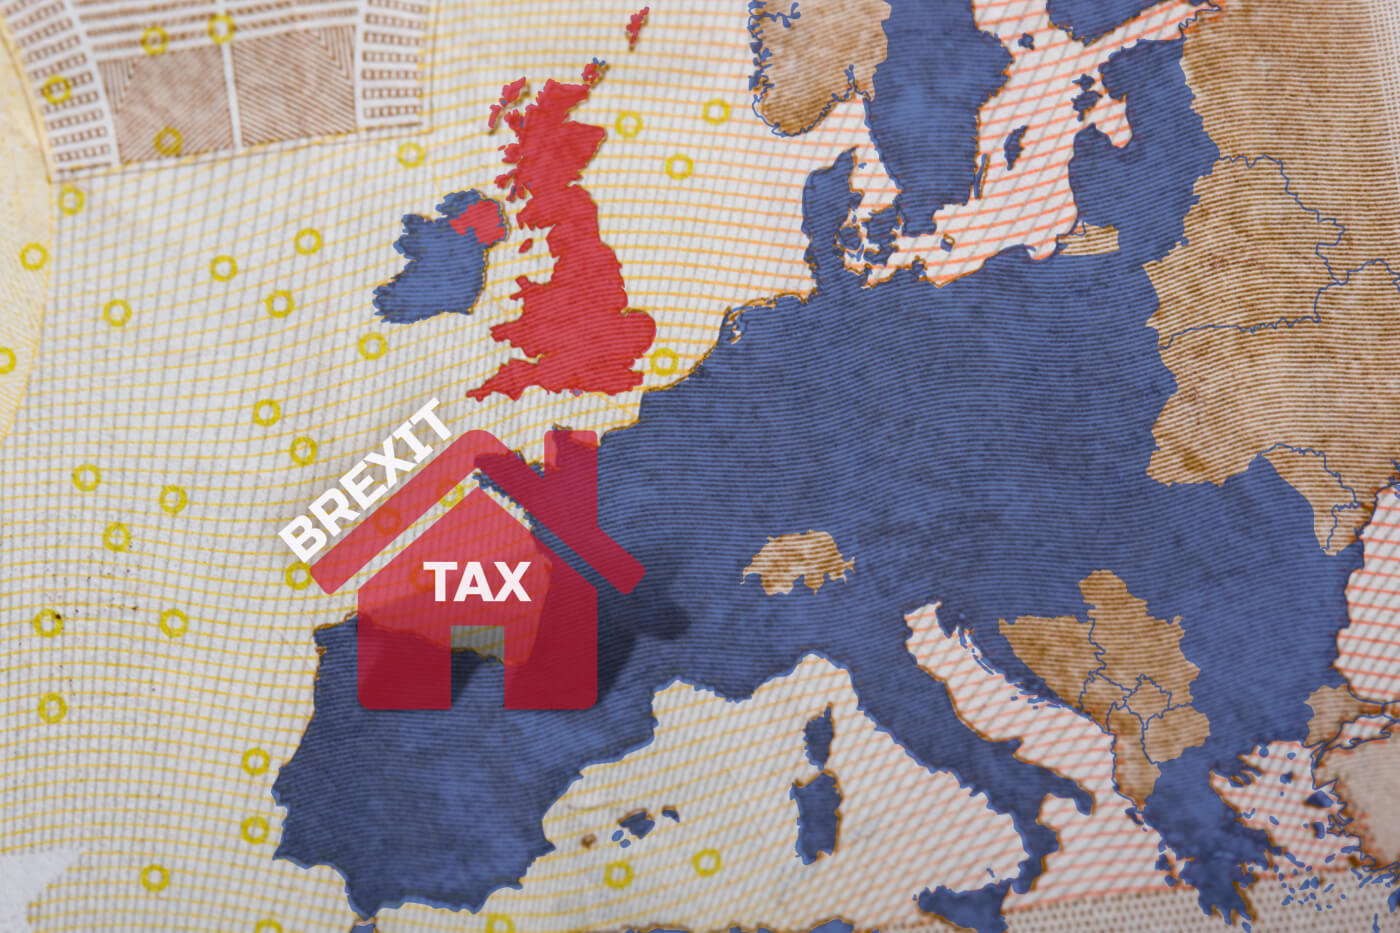 New Brexit property tax information non-resident owners should know